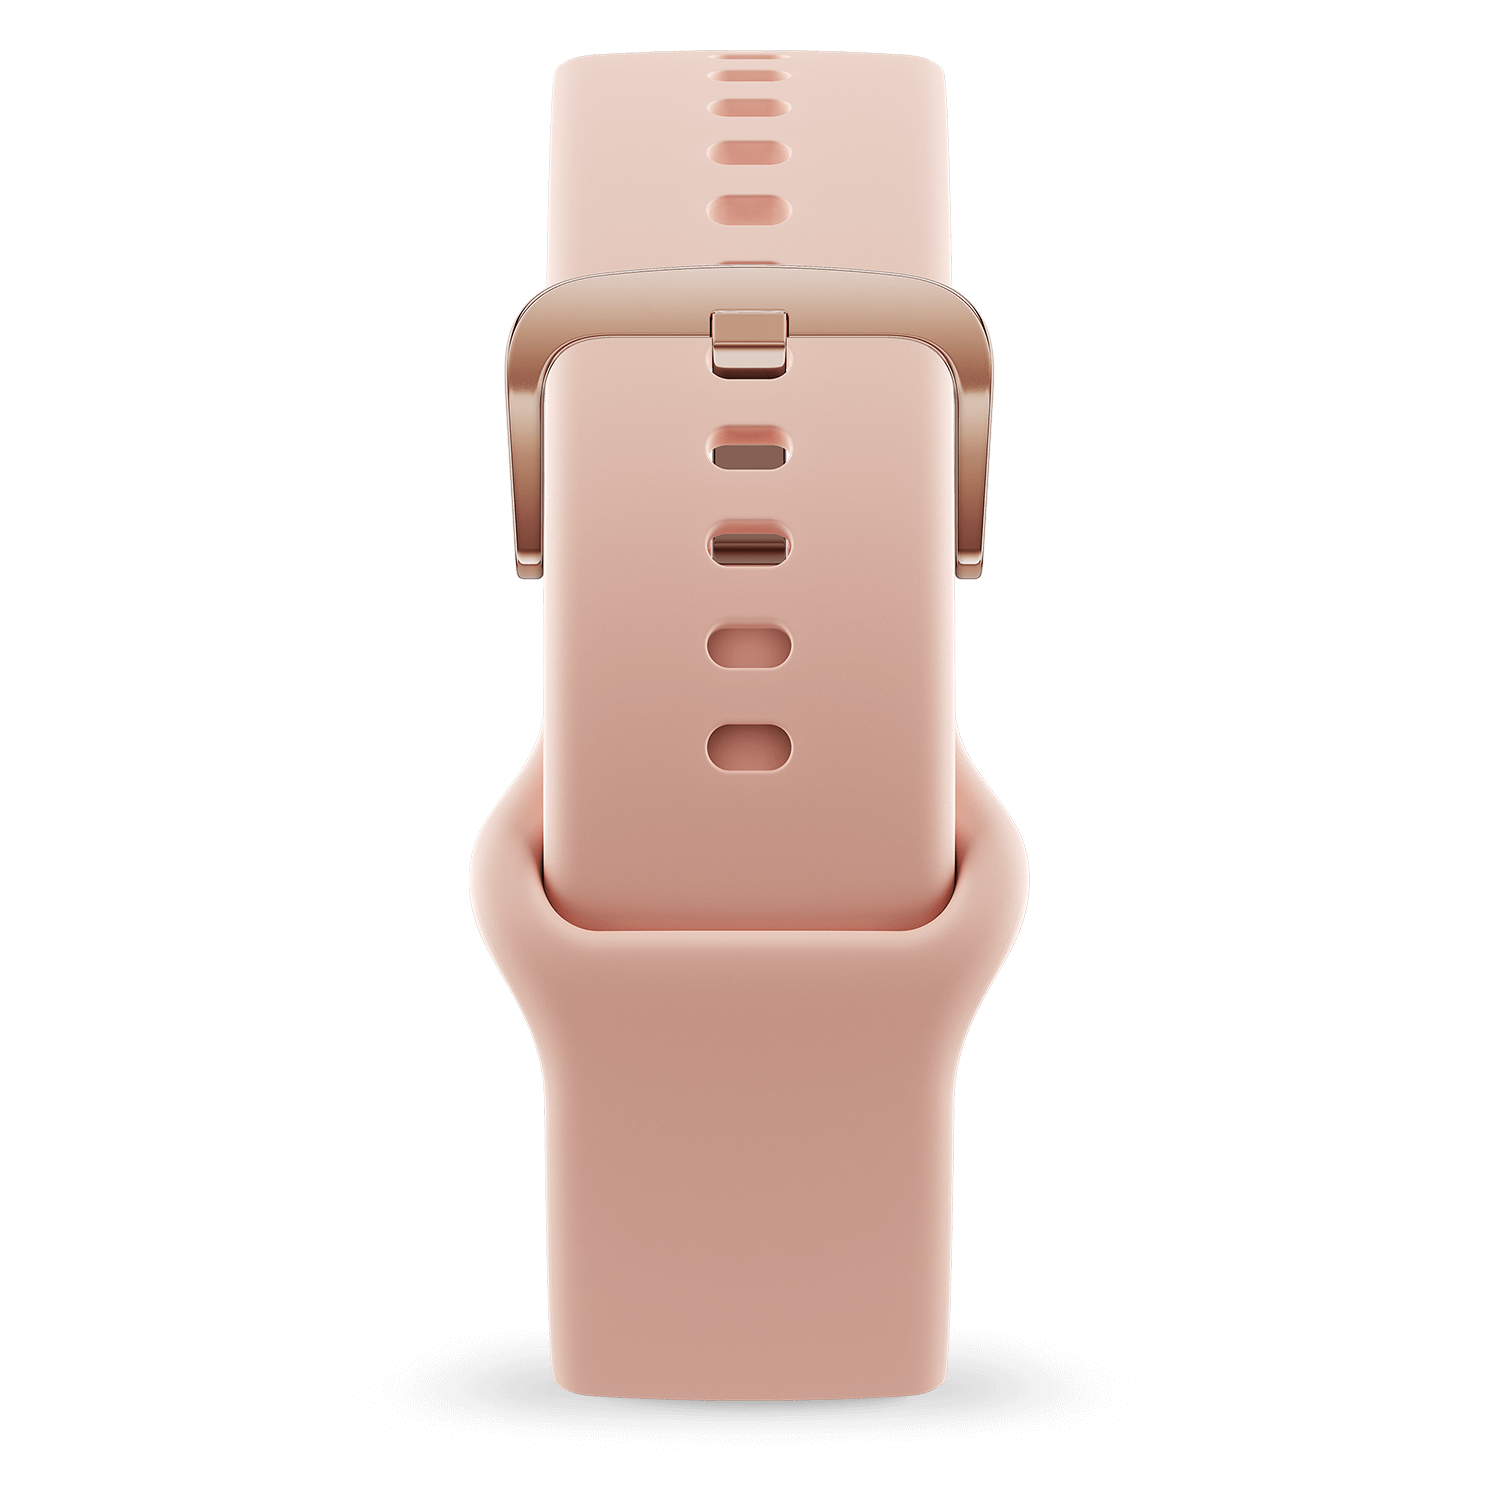 Montre Connectée Ice-Watch - Ice Smart Two - Rose Gold White